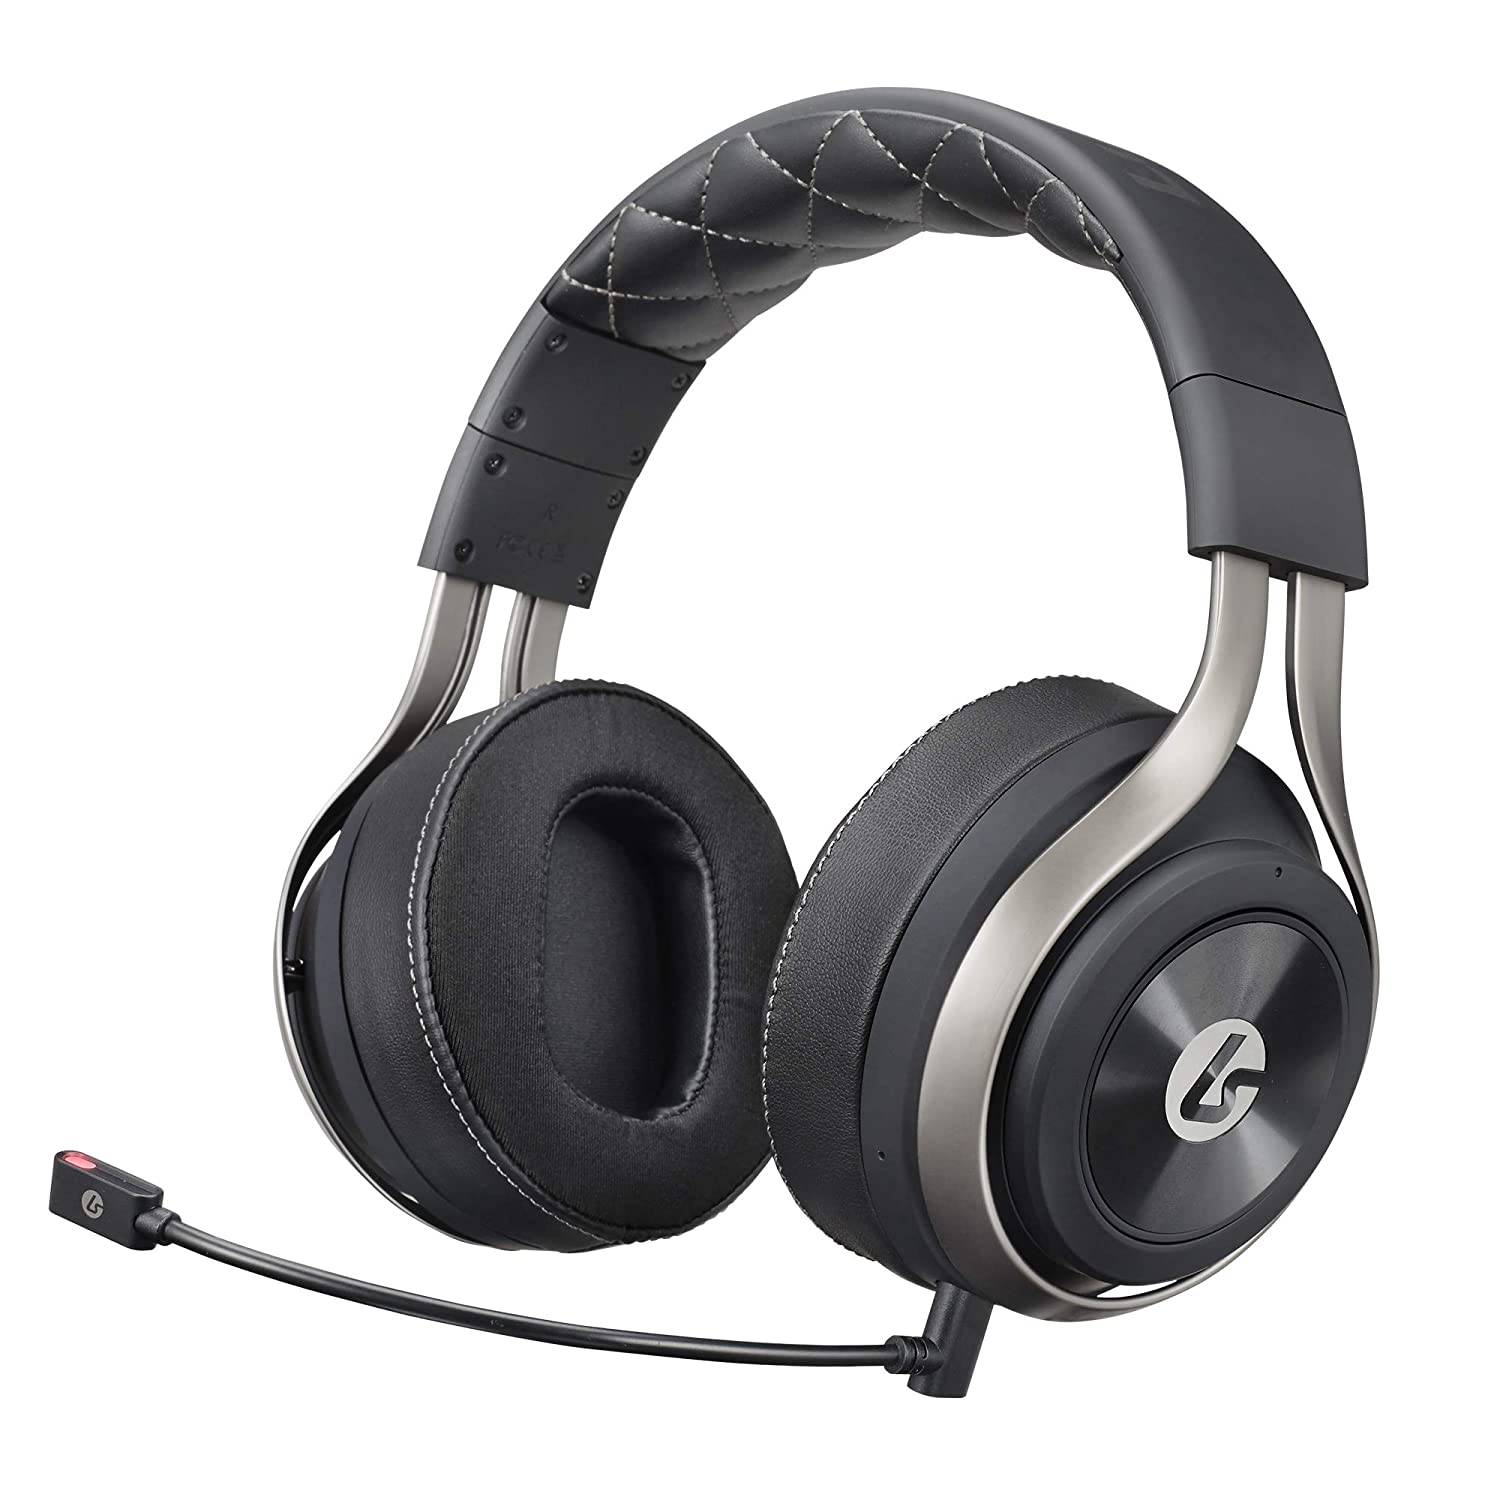 The LucidSound LS50X gaming headset in black against a white background.